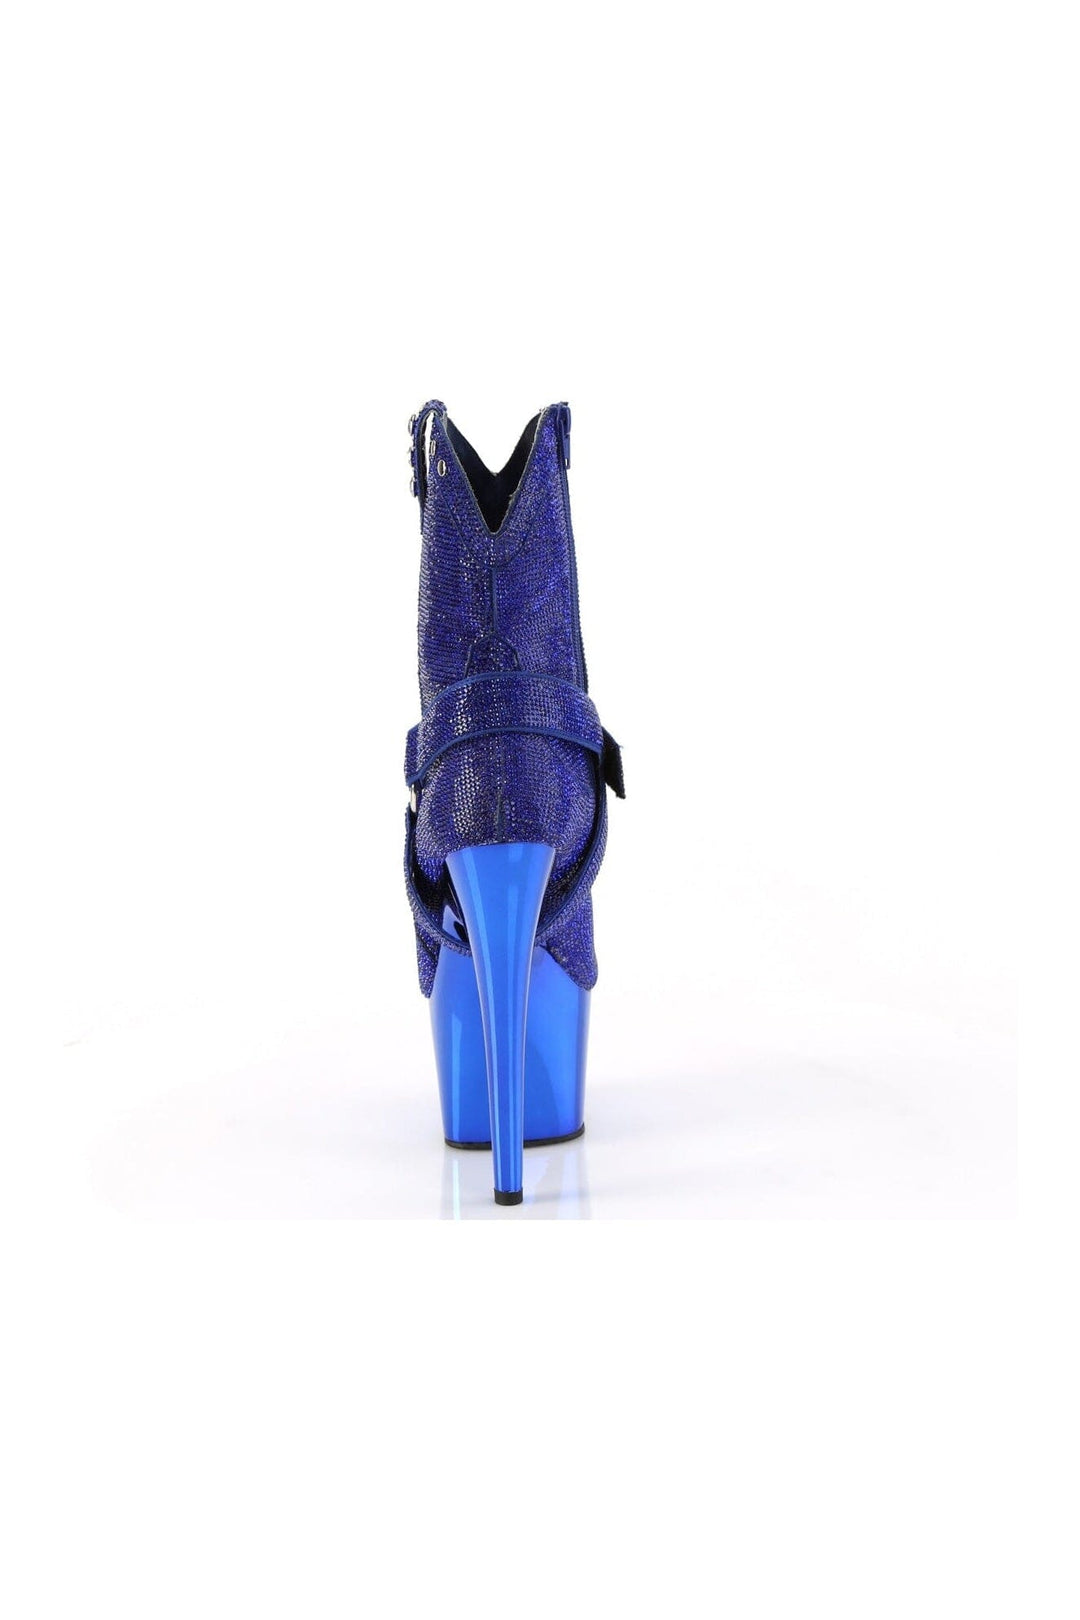 ADORE-1029CHRS Blue Faux Suede Ankle Boot-Ankle Boots-Pleaser-SEXYSHOES.COM